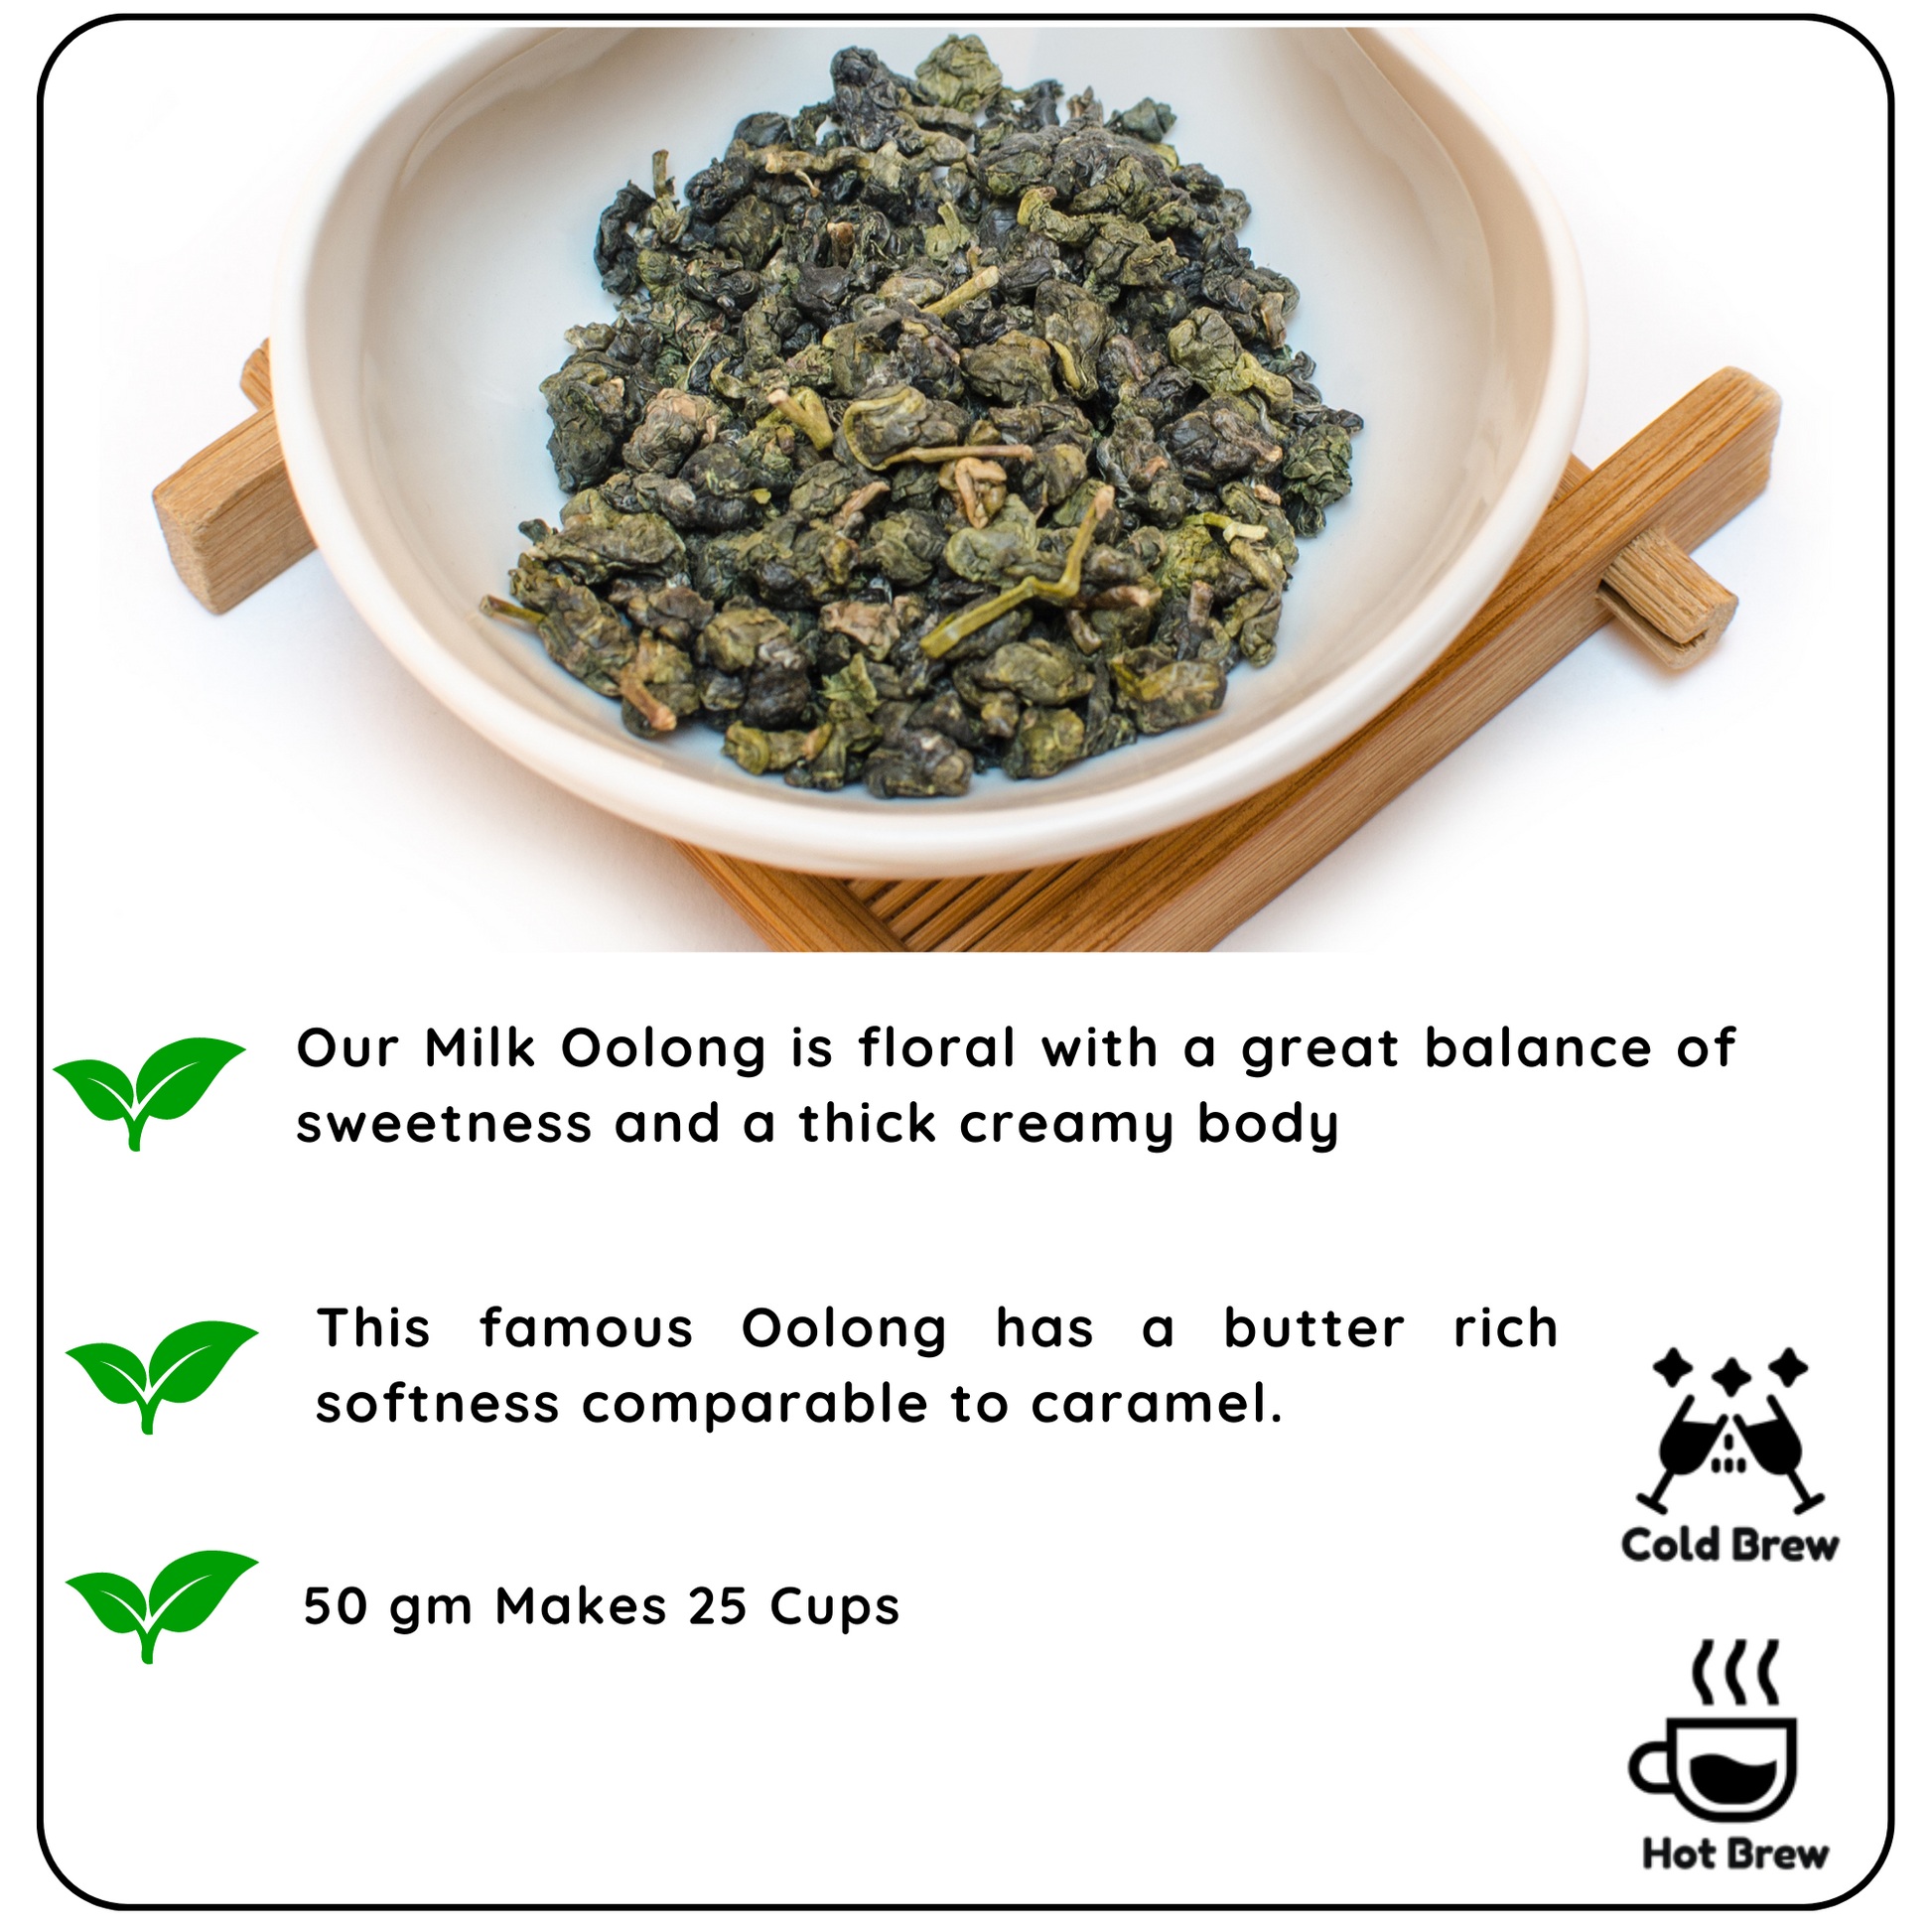 REJUVENATING China Milk Oolong Leaf - A Tea for Relaxation and Vitality - Radhikas Fine Teas and Whatnots